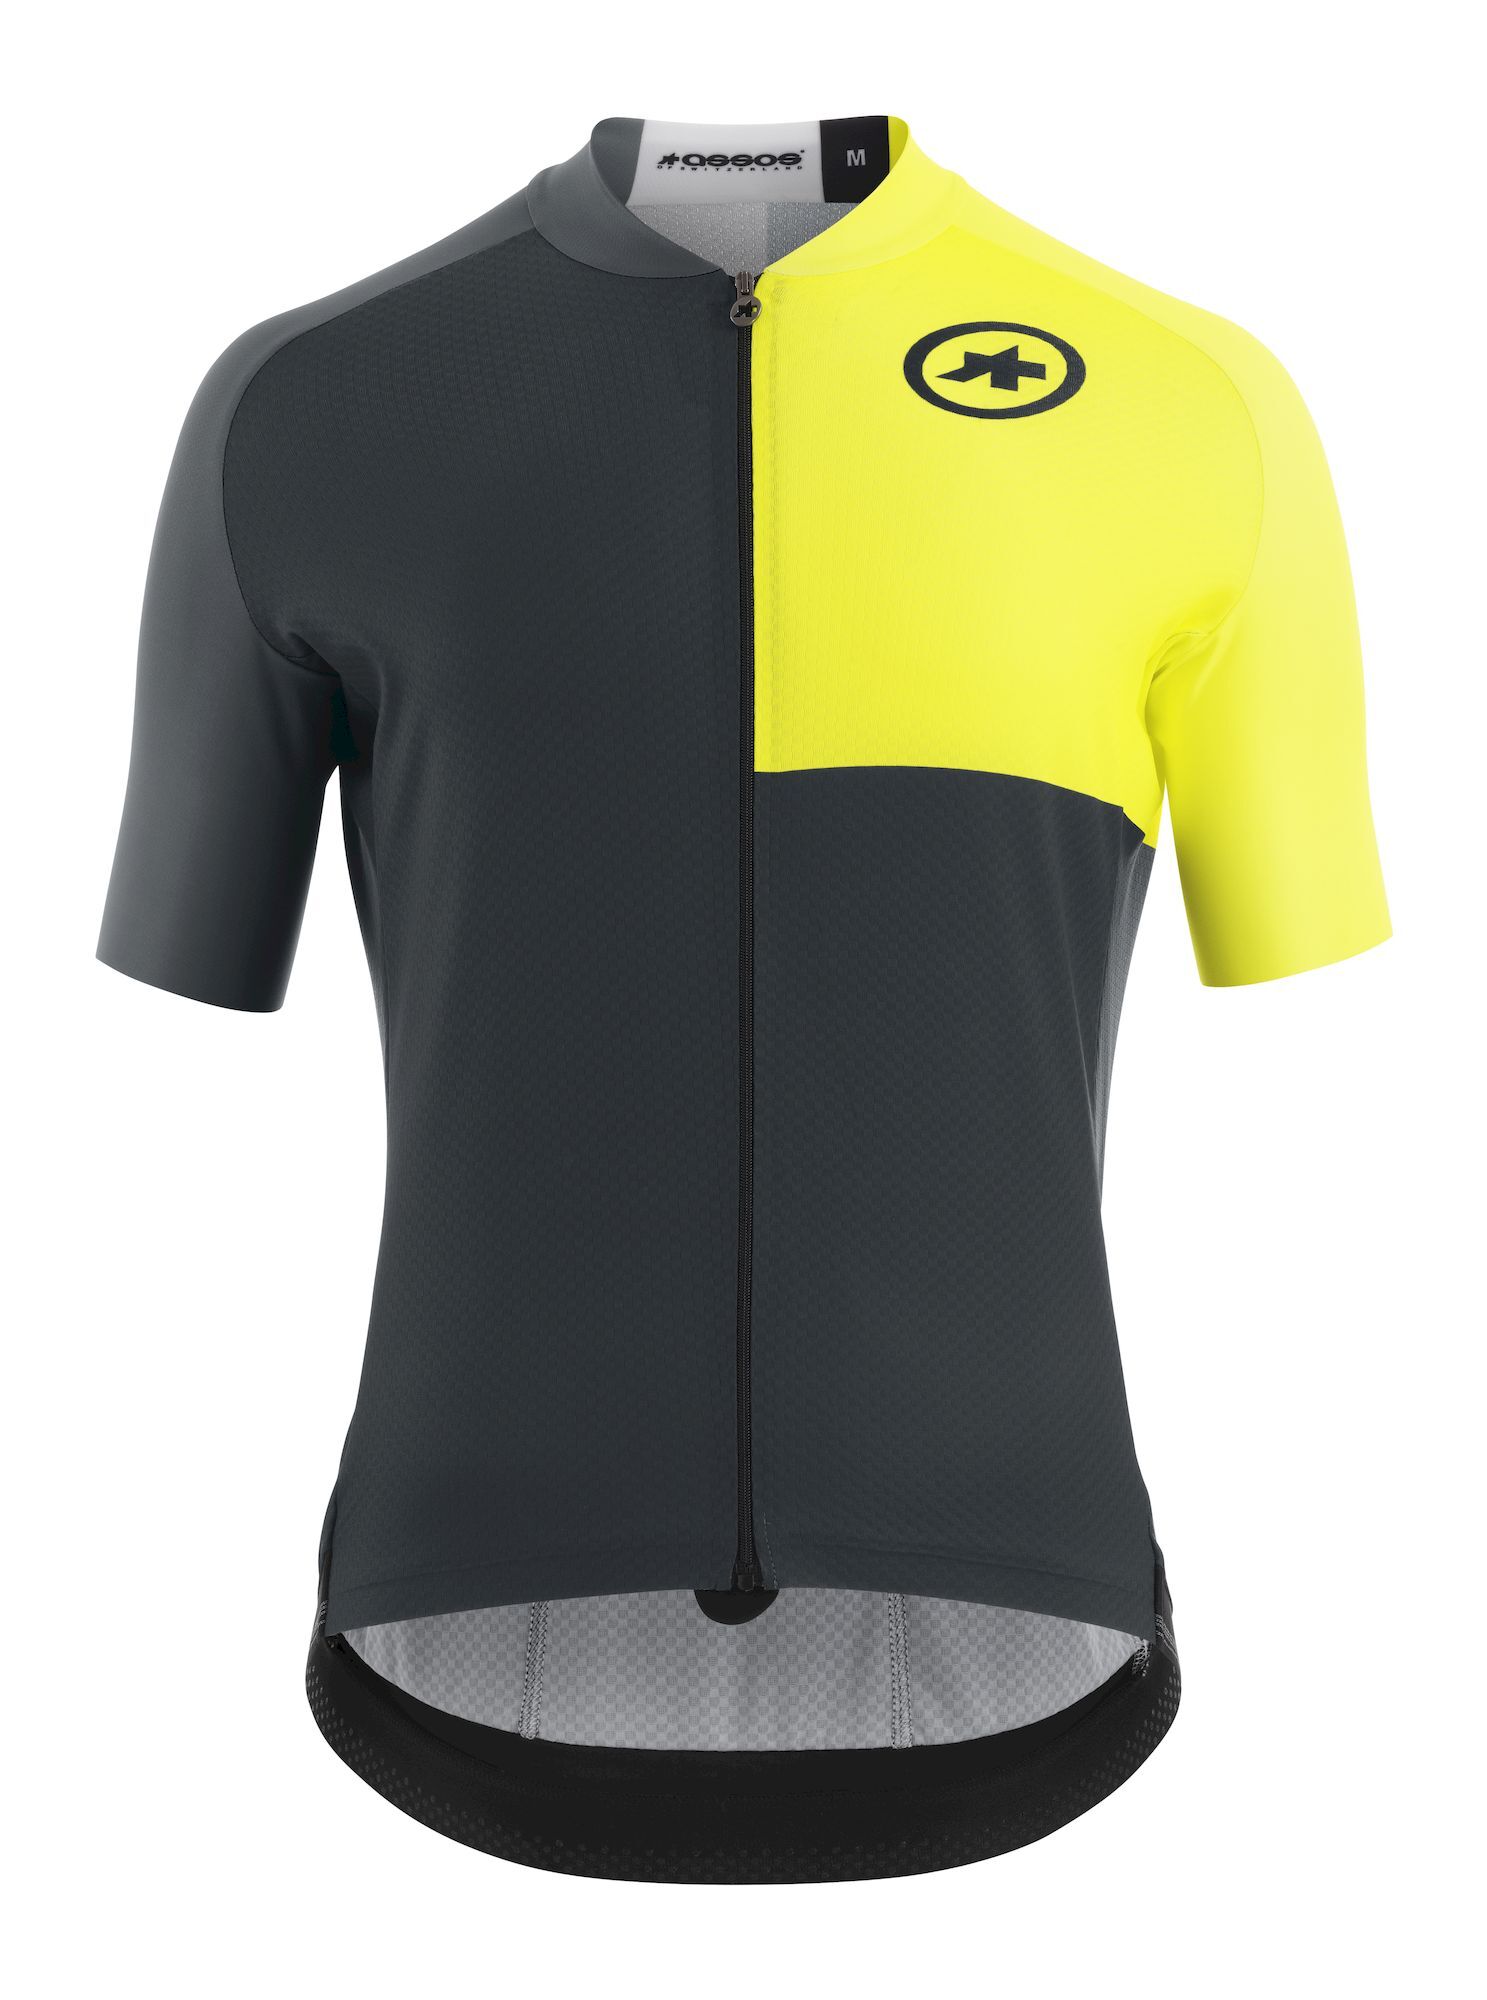 Assos Mille GT Jersey C2 EVO Stahlstern - Maillot ciclismo - Hombre | Hardloop